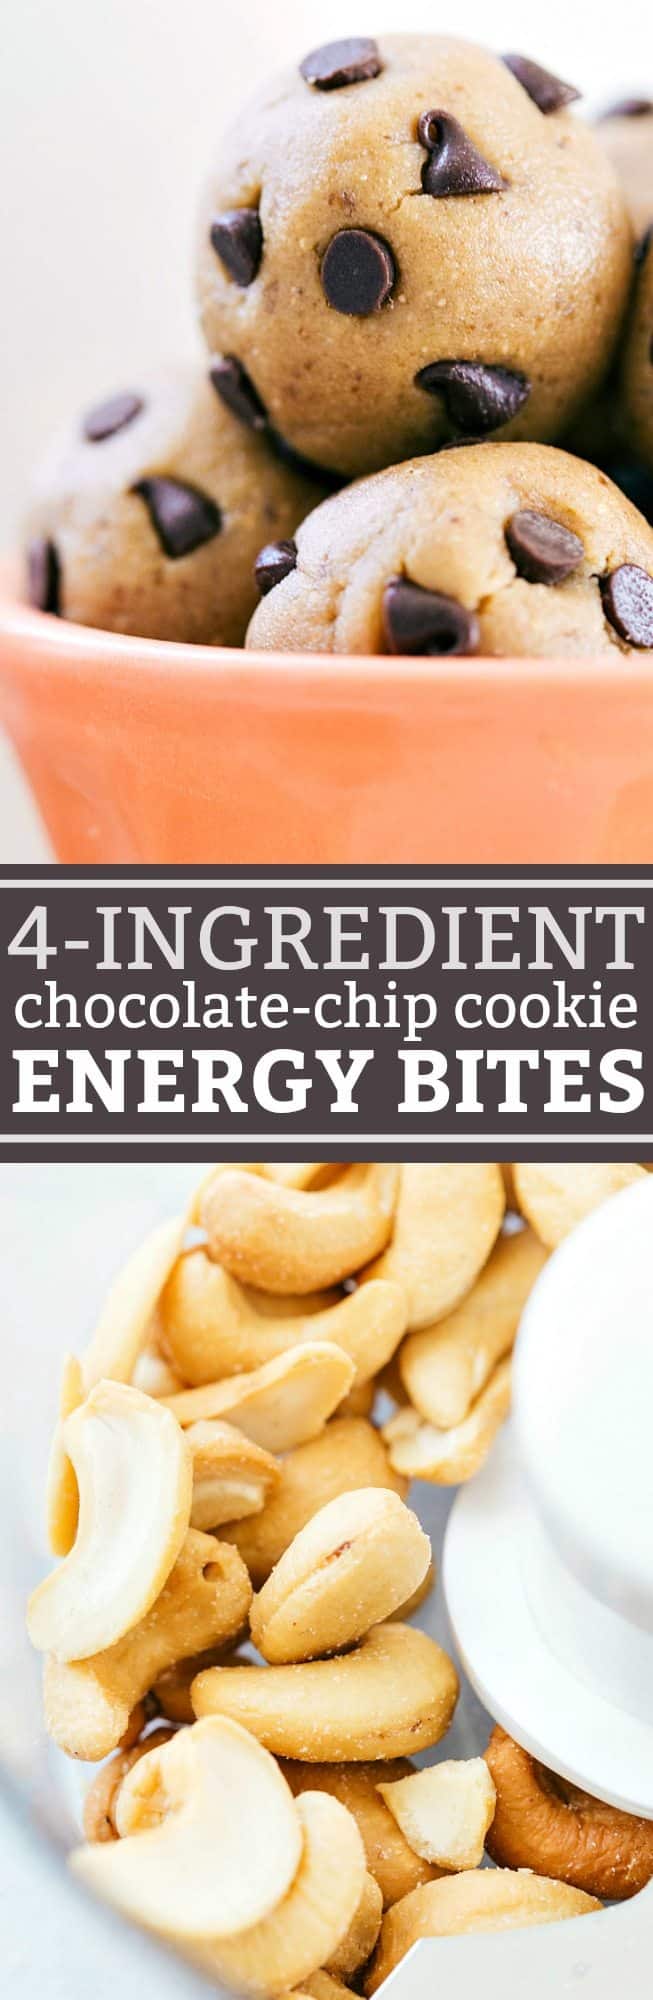 Only FOUR ingredients to make these amazing and secretly healthy chocolate-chip cookie flavored energy bites! Healthy and delicious! via chelseasmessyapron.com